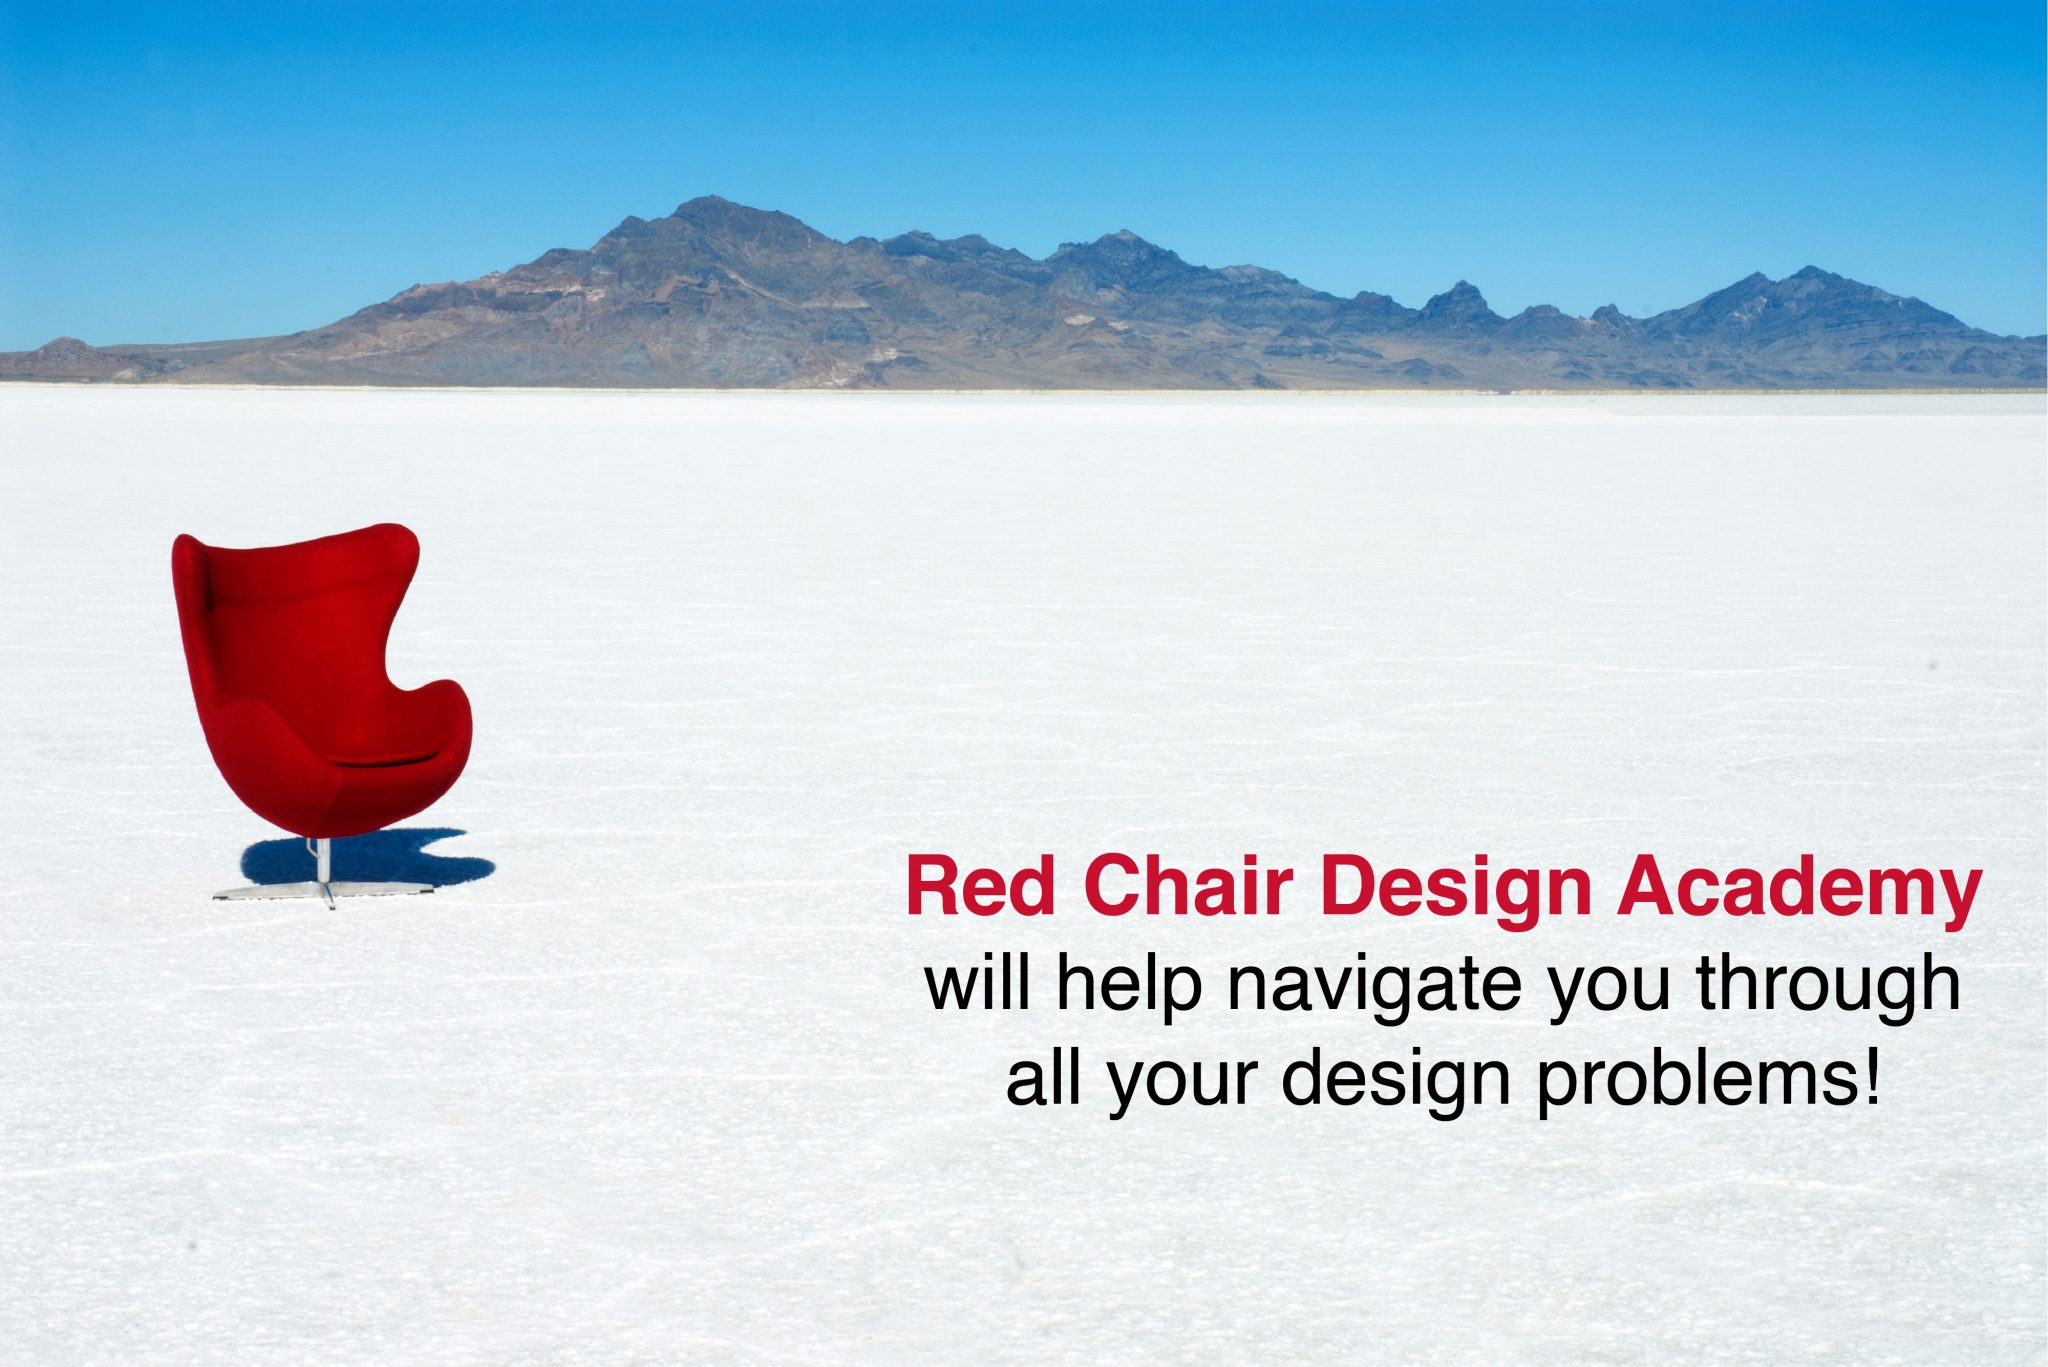 Red Chair Design Academy